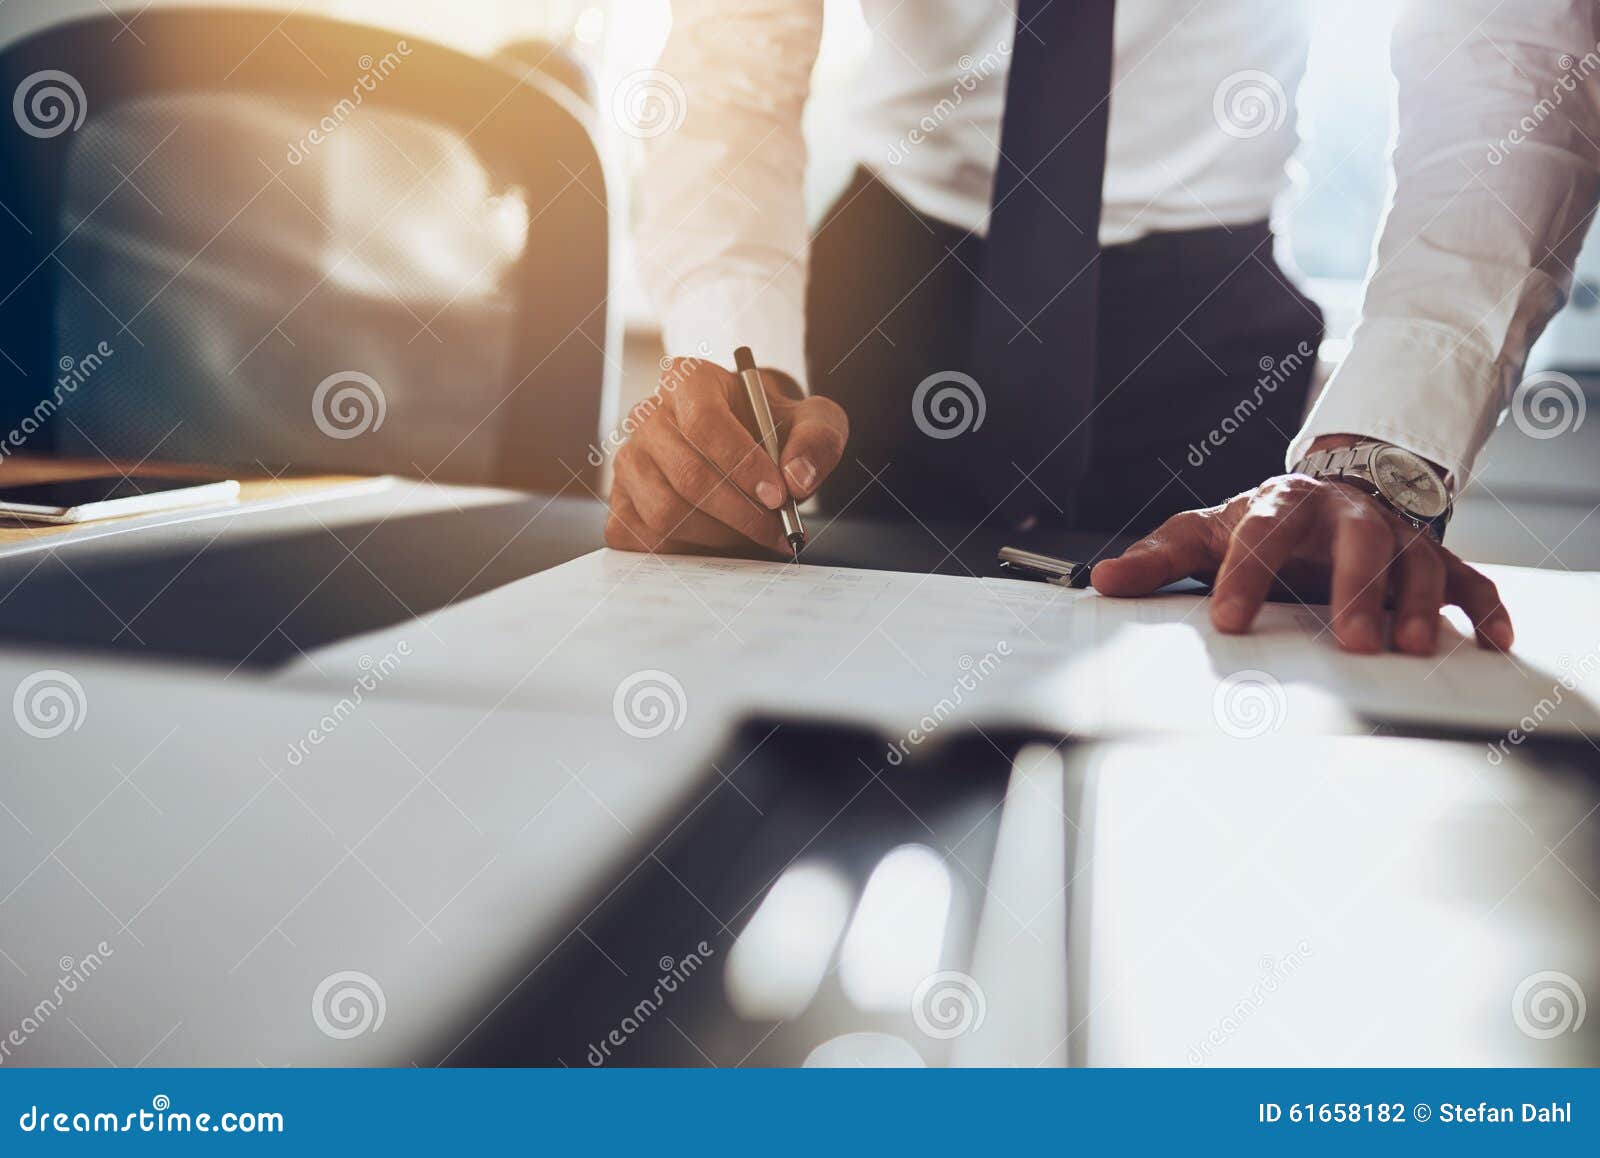 close up business man signing contract